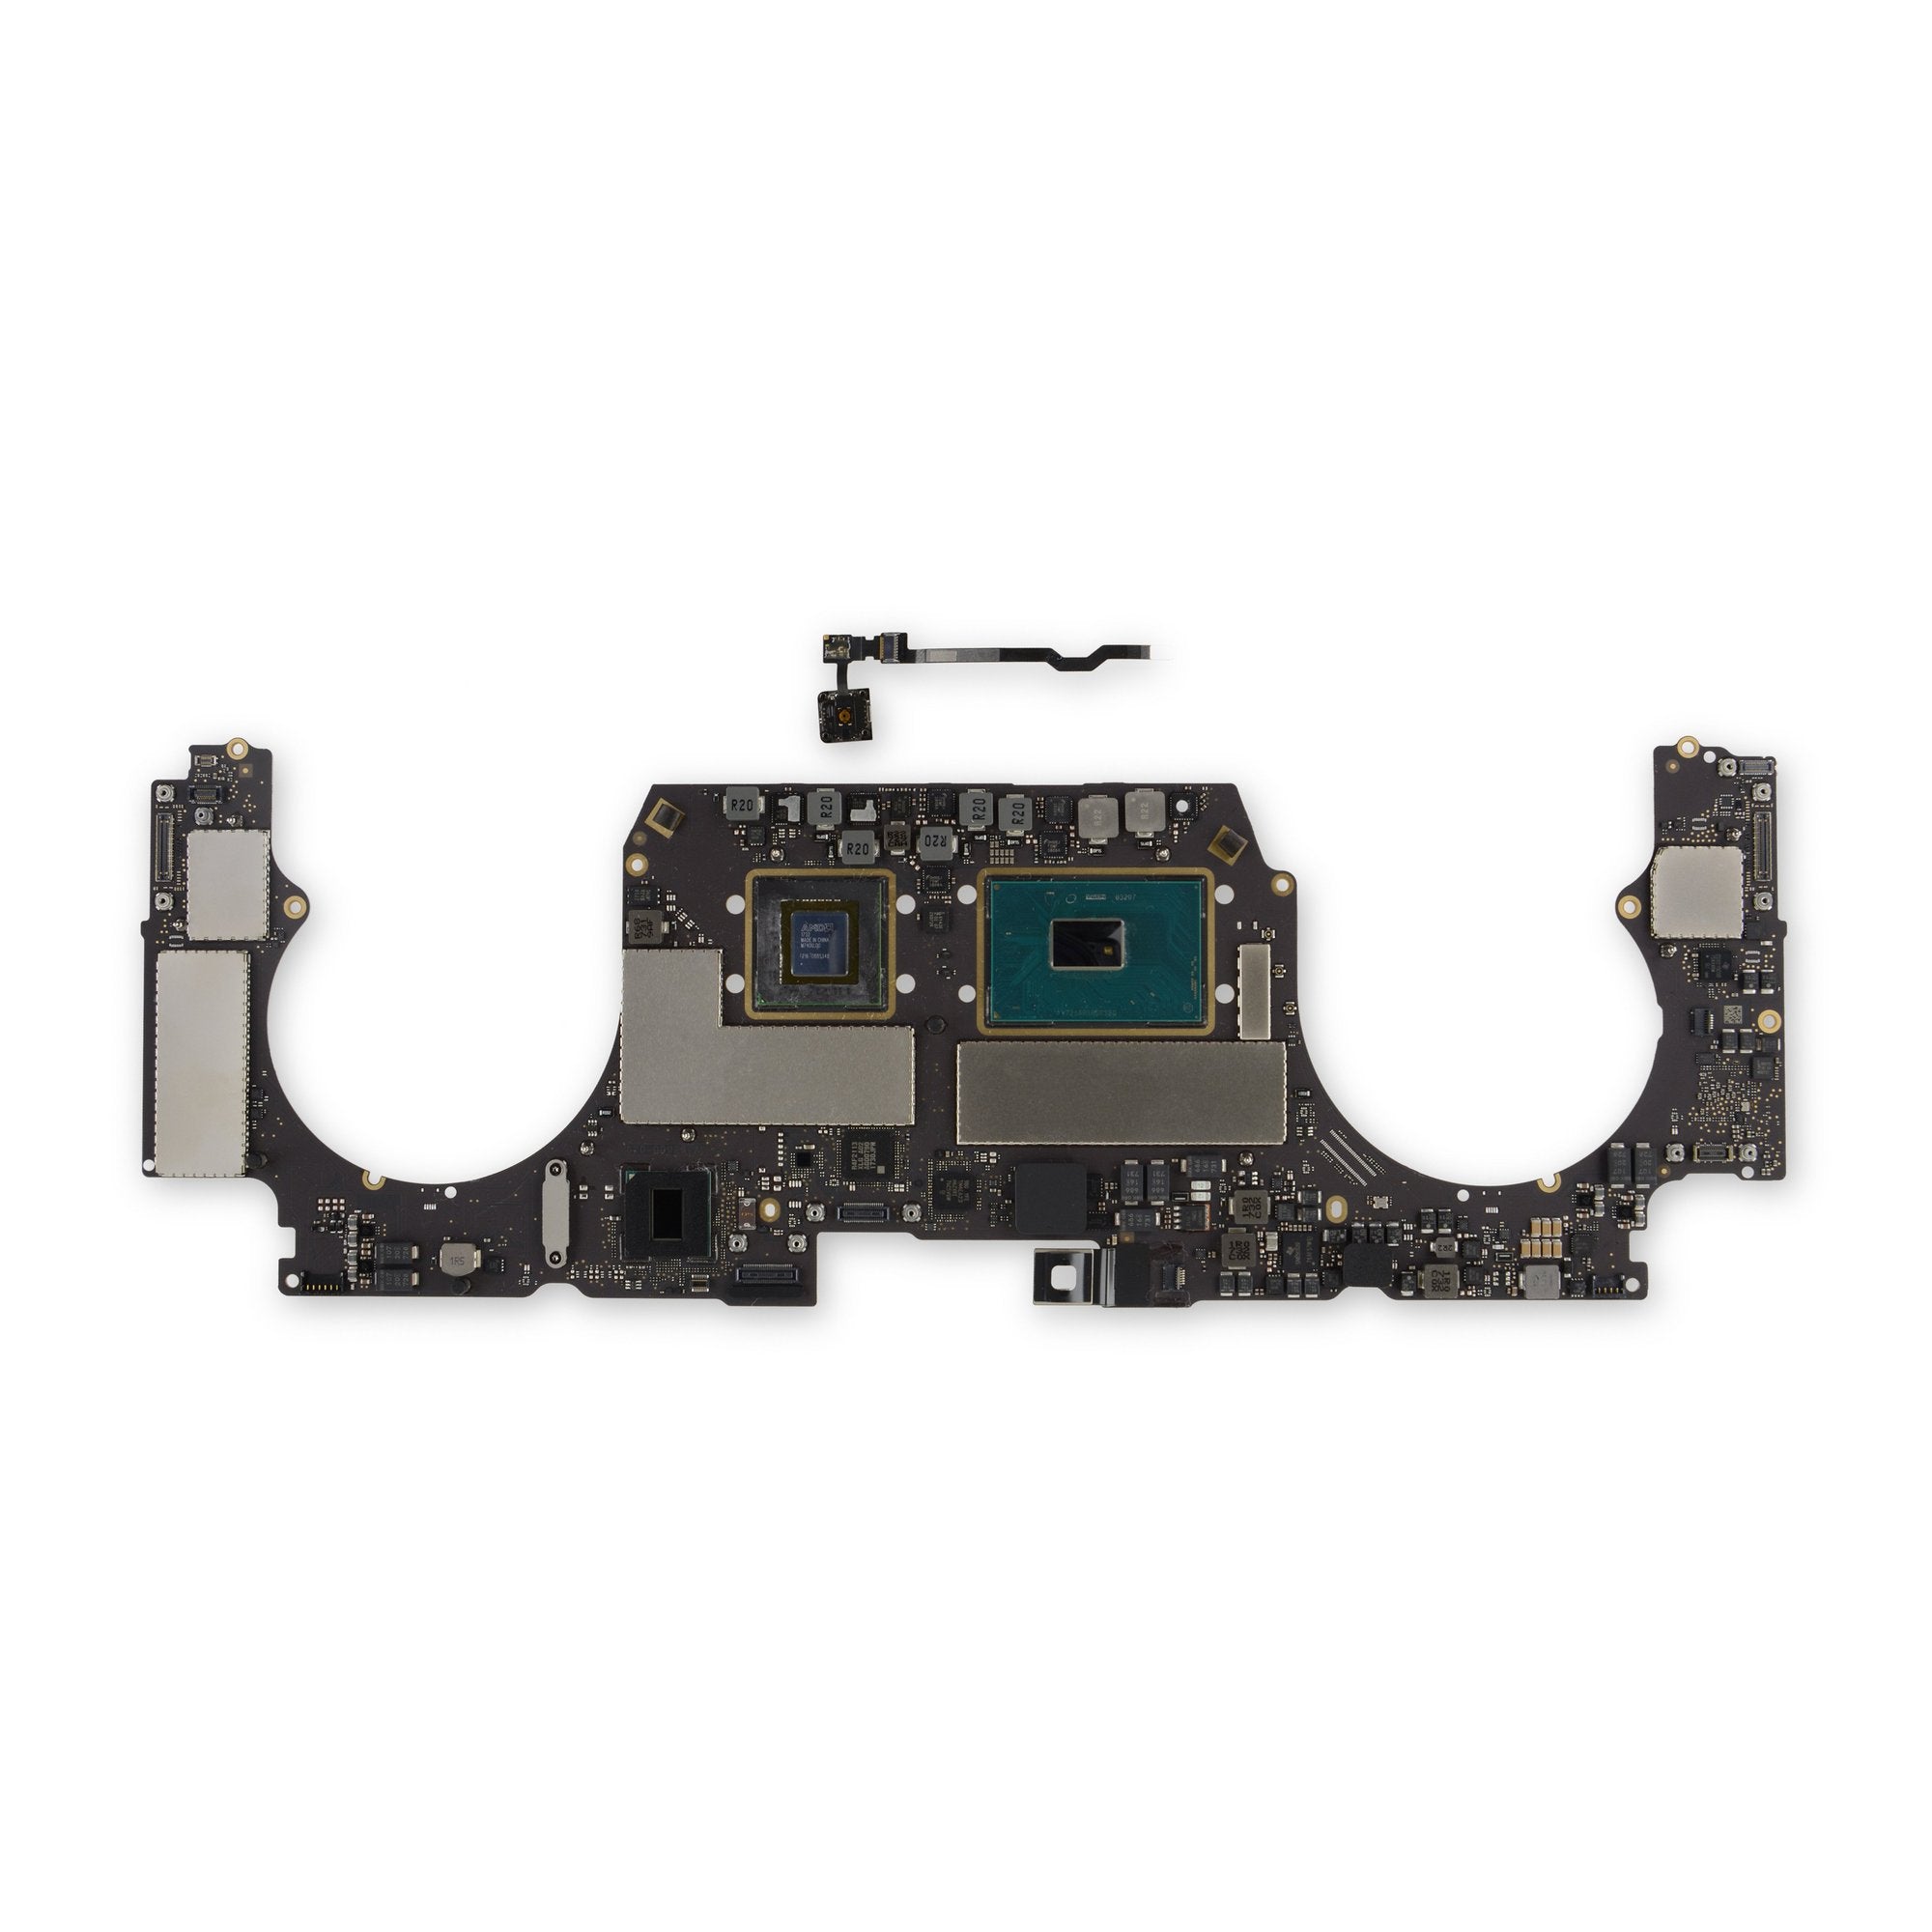 MacBook Pro 15" Retina (2017) 2.8 GHz Logic Board, Radeon Pro 555, with Paired Touch ID Sensor 512 GB Used